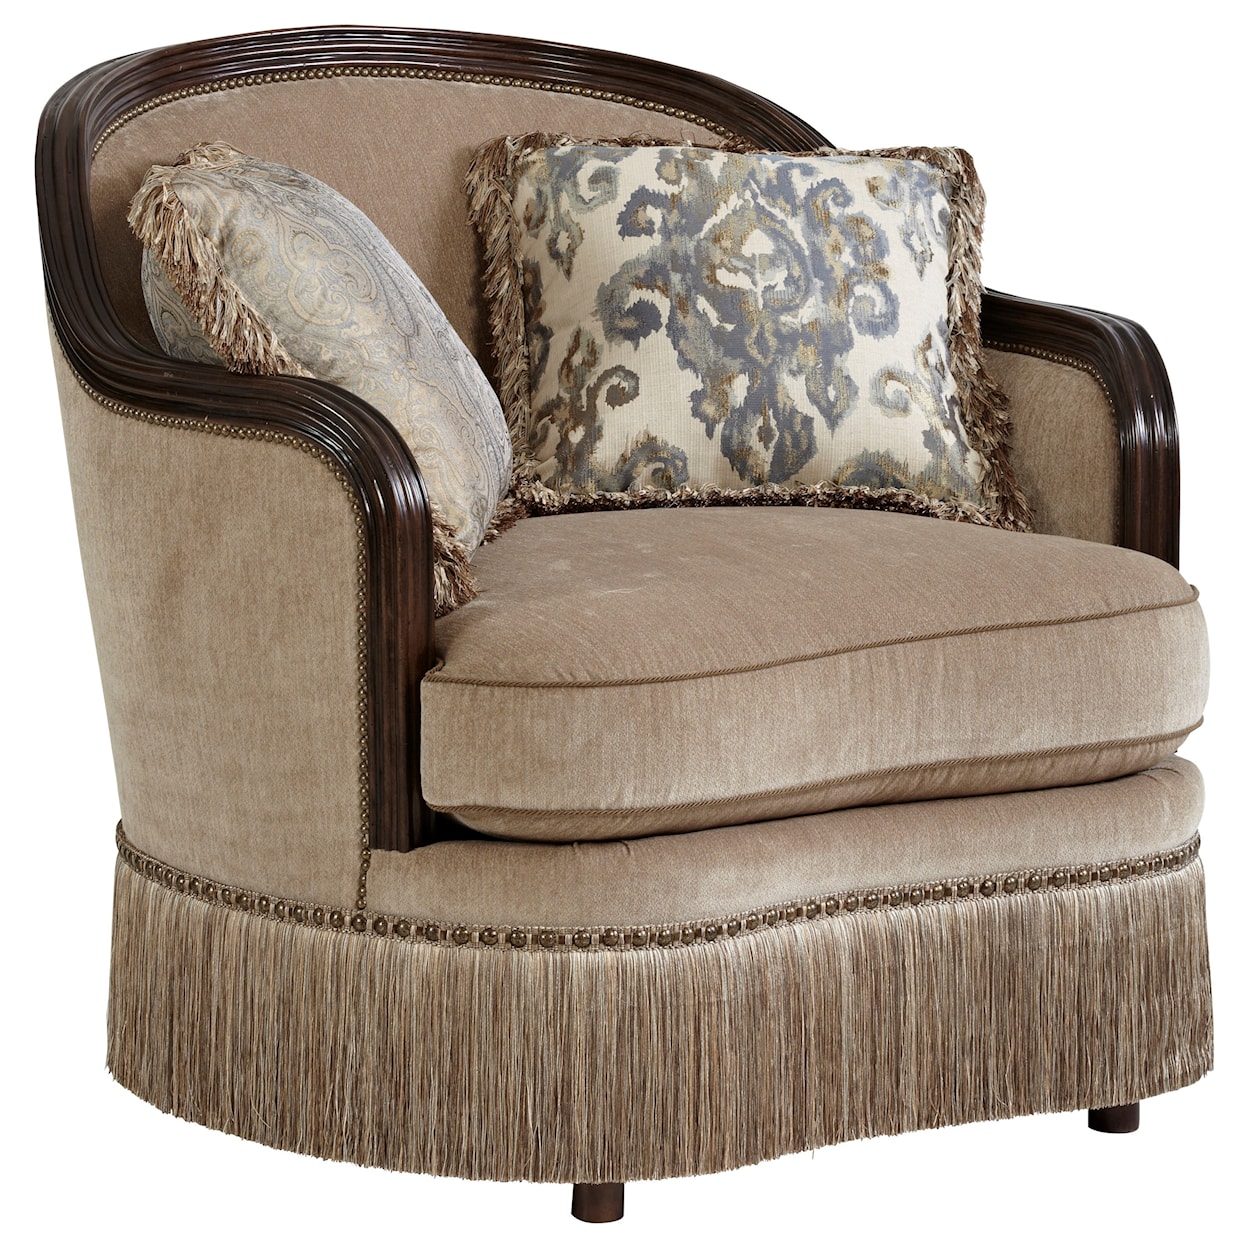 A.R.T. Furniture Inc Giovanna Upholstered Chair